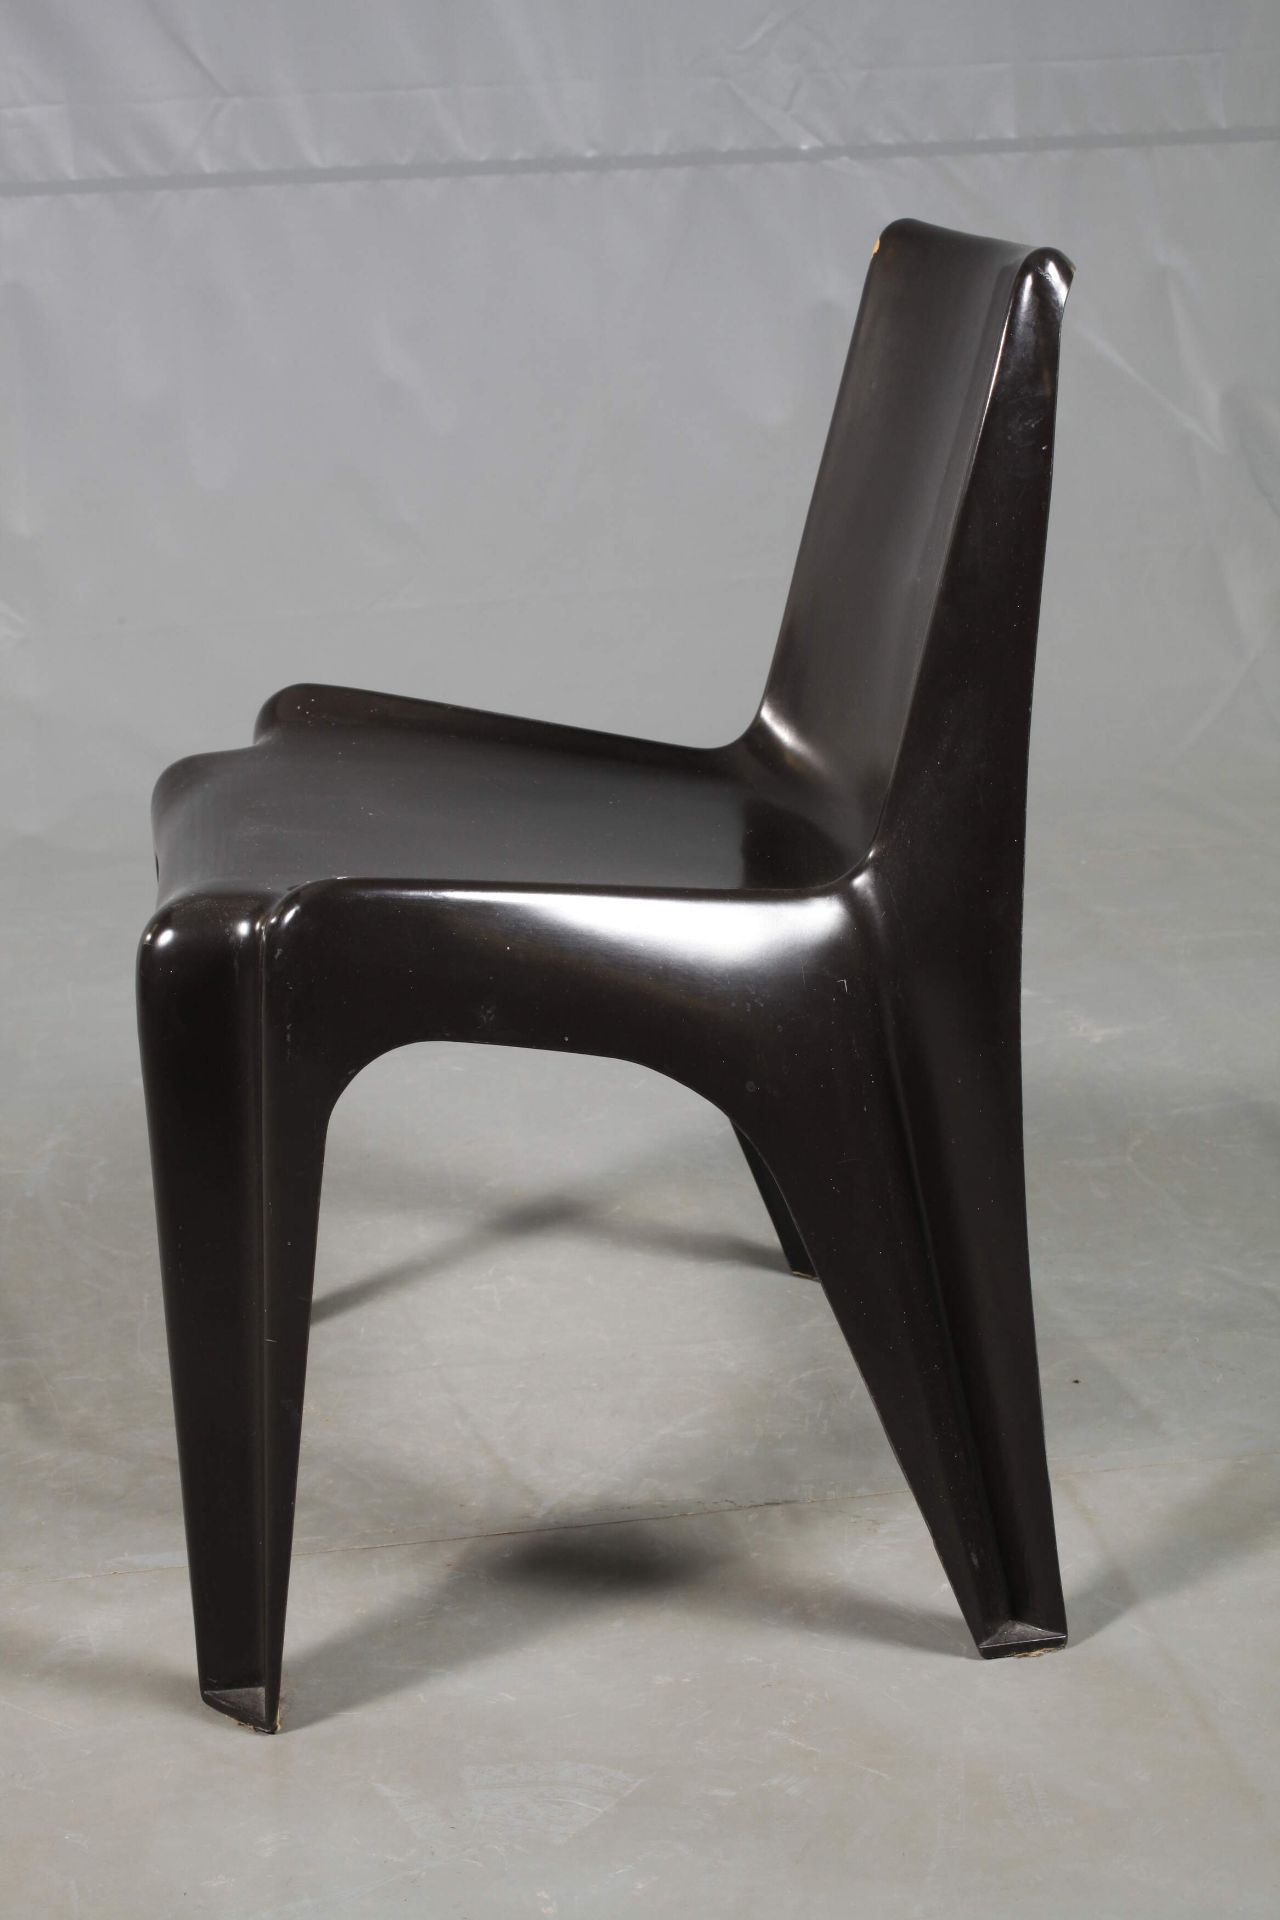 Stacking chair Bofinger - Image 3 of 6